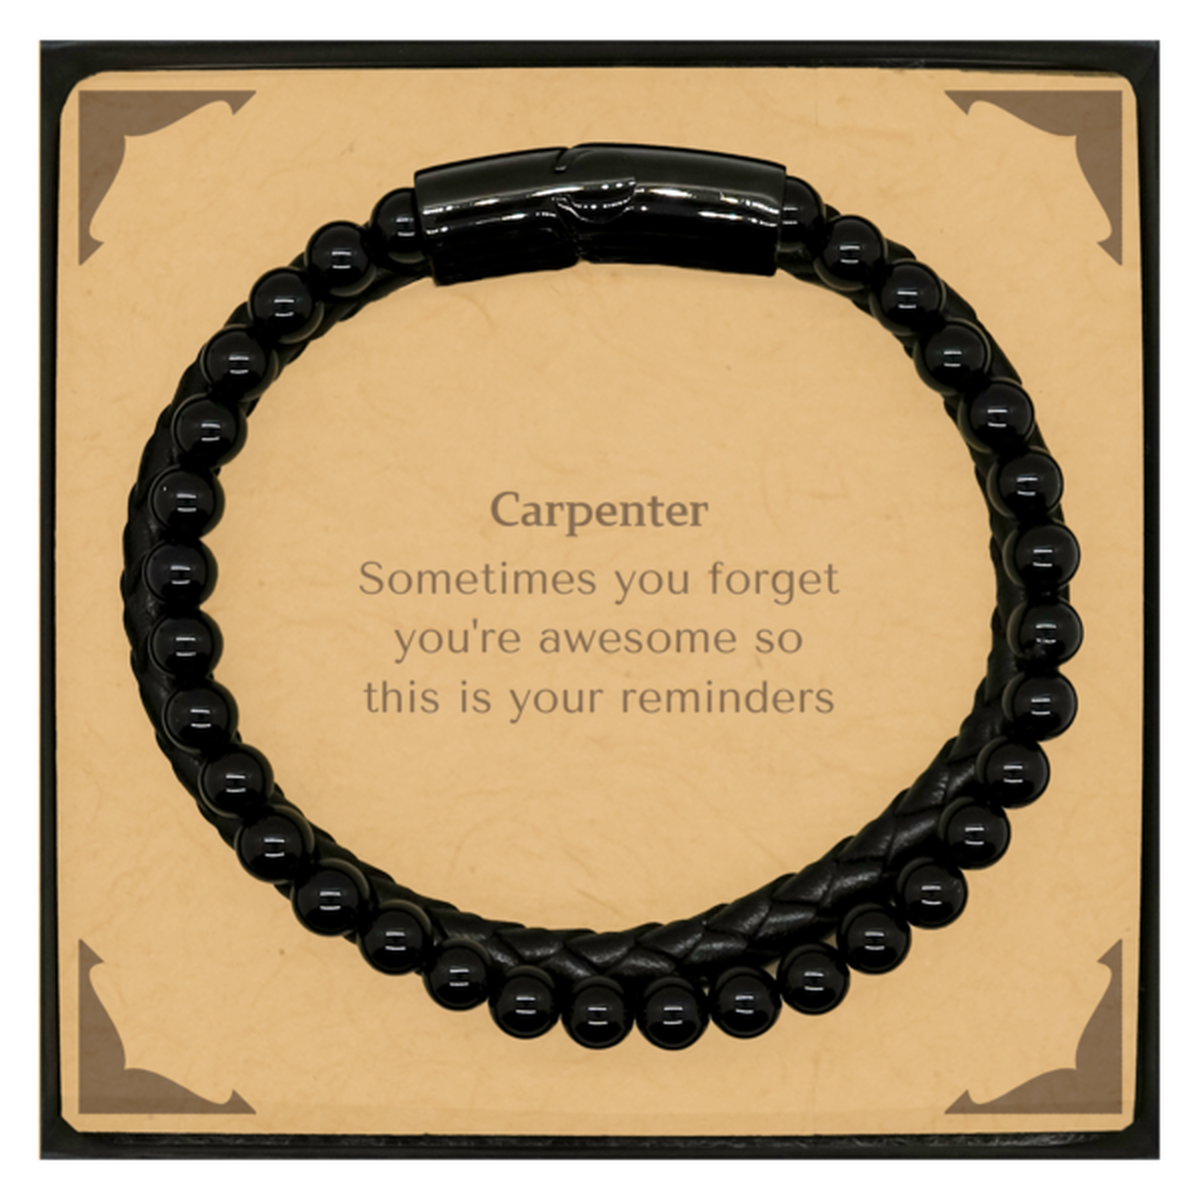 Sentimental Carpenter Stone Leather Bracelets, Carpenter Sometimes you forget you're awesome so this is your reminders, Graduation Christmas Birthday Gifts for Carpenter, Men, Women, Coworkers